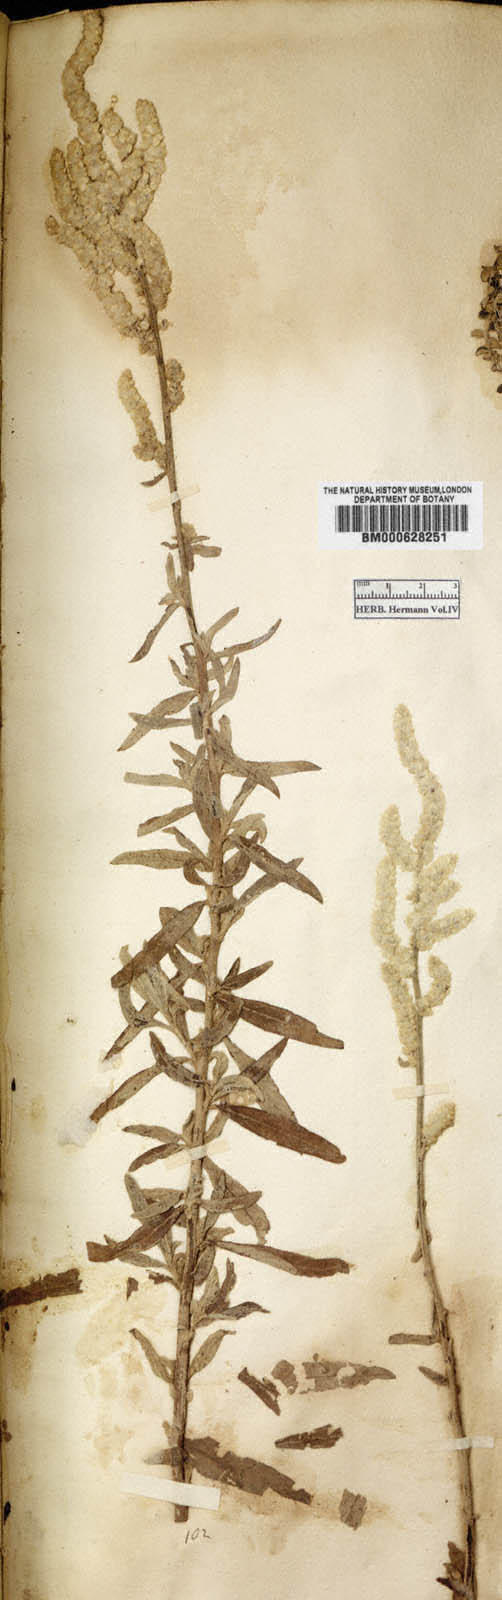 http://www.nhm.ac.uk//resources/research-curation/projects/hermann-herbarium/lgimages/BM000628251.JPG